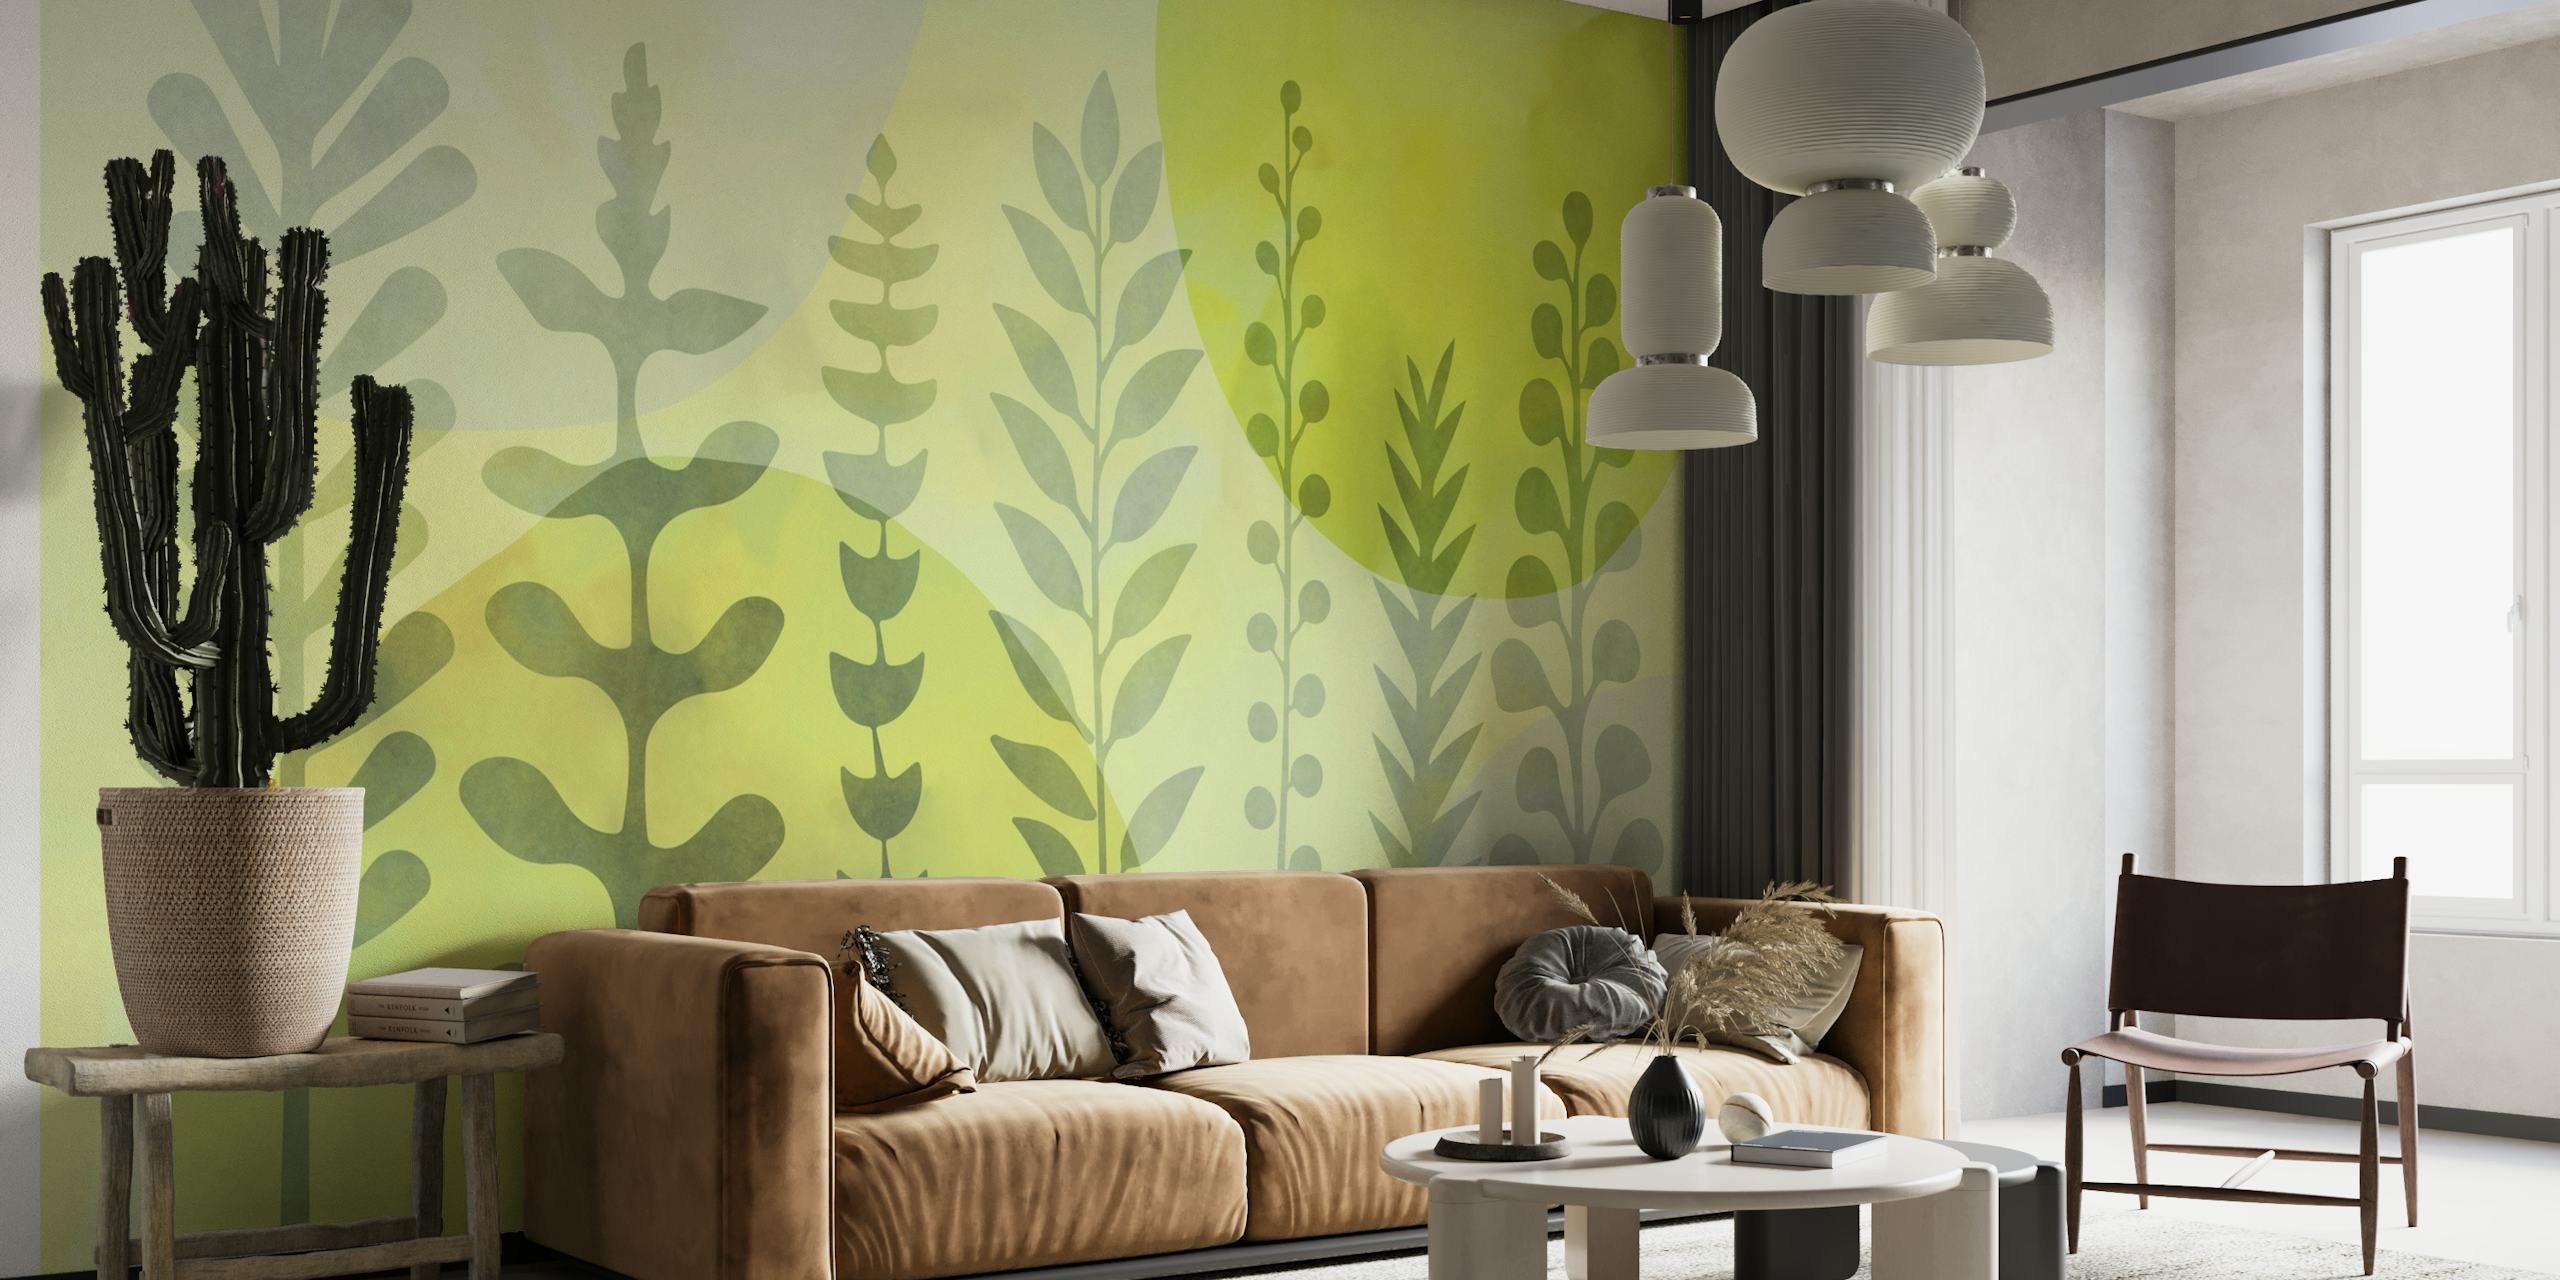 Whimsical Nature Shapes Lime Green wallpaper